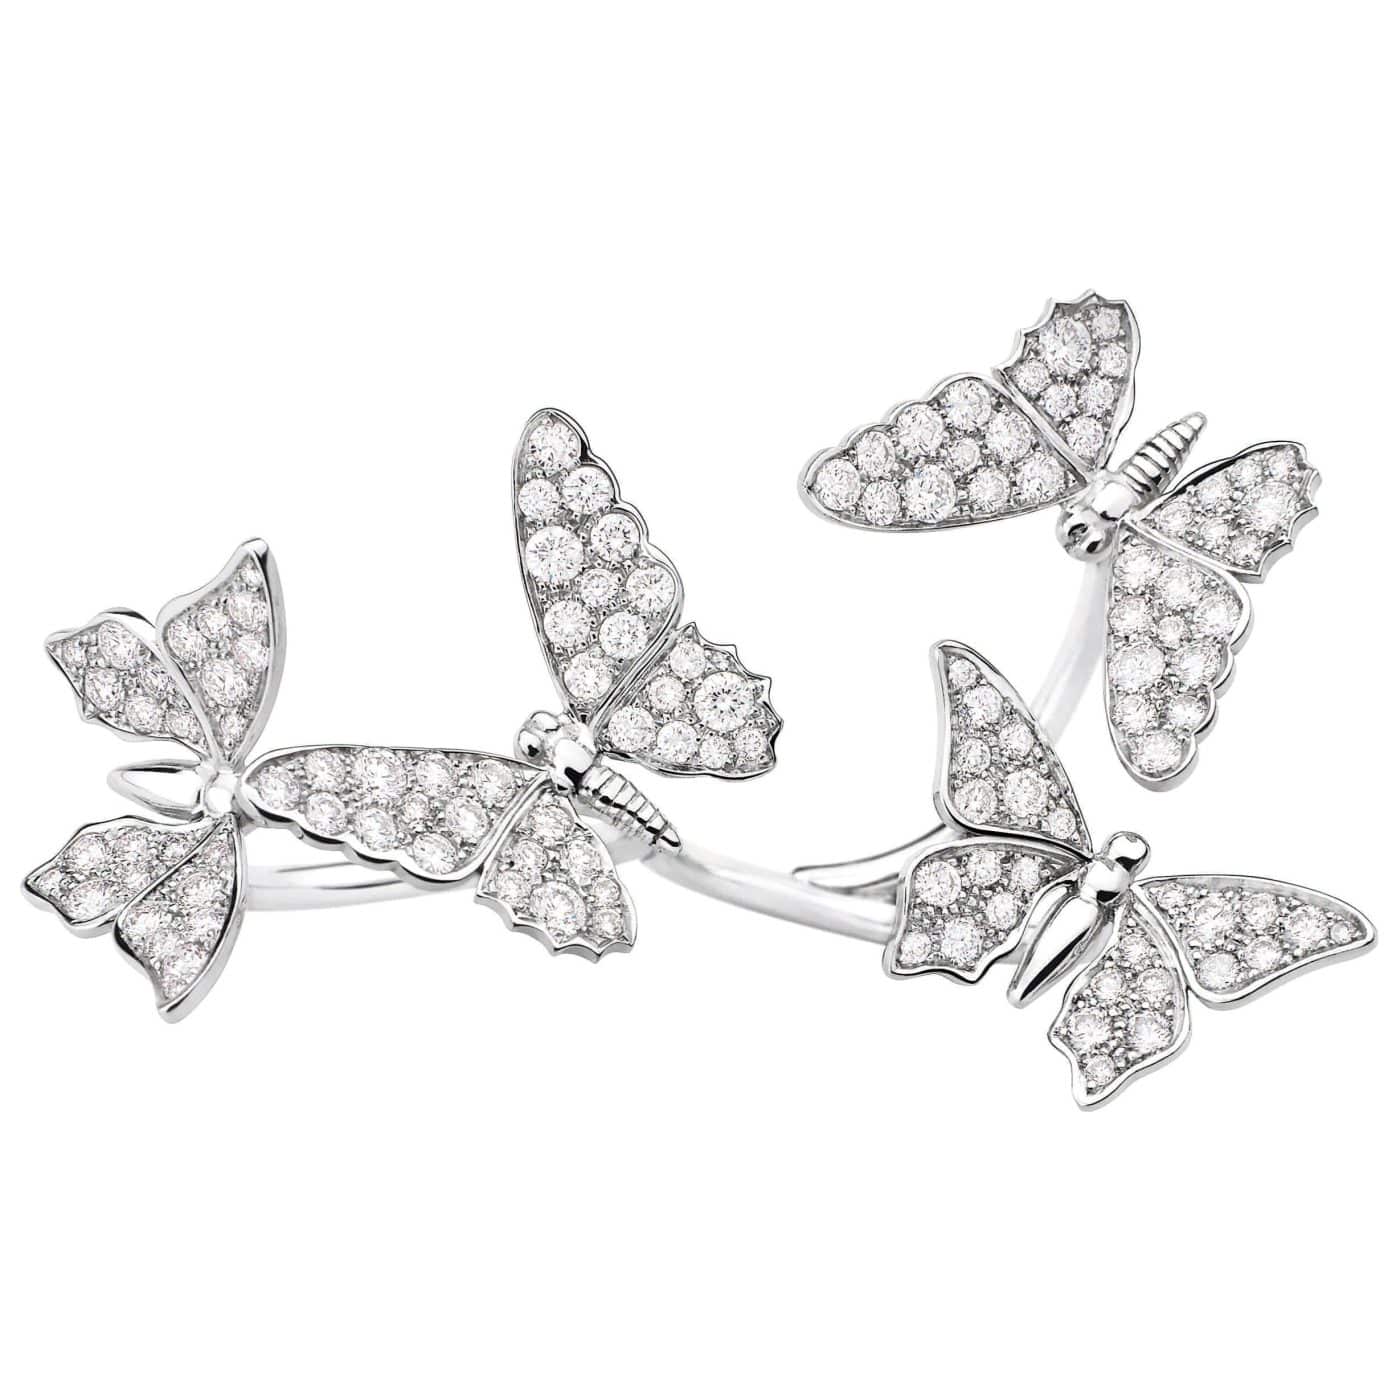 FOUR BUTTERFLY TWO-FINGER RING